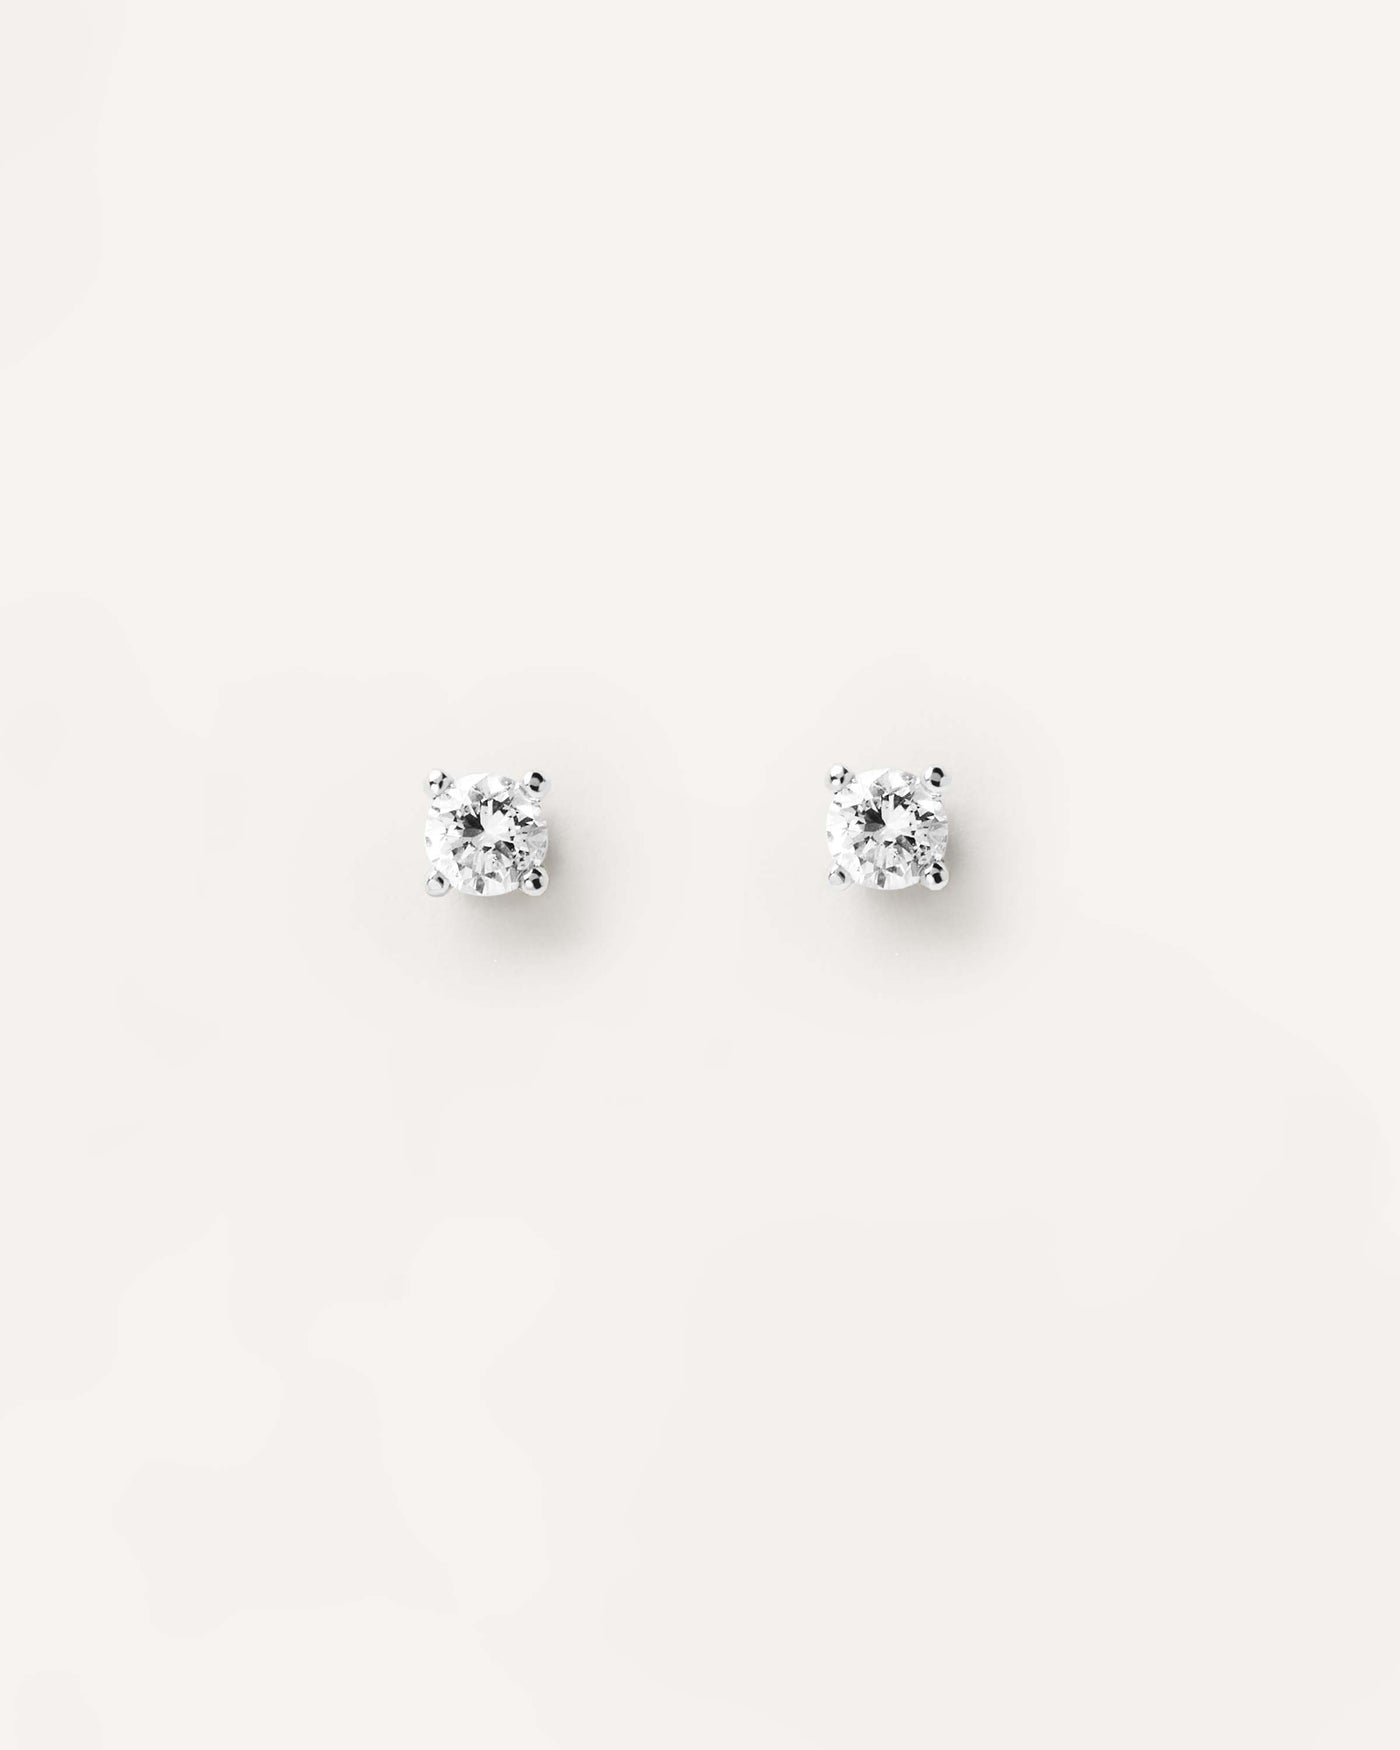 2023 Selection | Diamonds and White Gold Solitaire Studs. 18K white gold pin earrings with lab-grown solitary diamond of 0.10 carat each. Get the latest arrival from PDPAOLA. Place your order safely and get this Best Seller. Free Shipping.